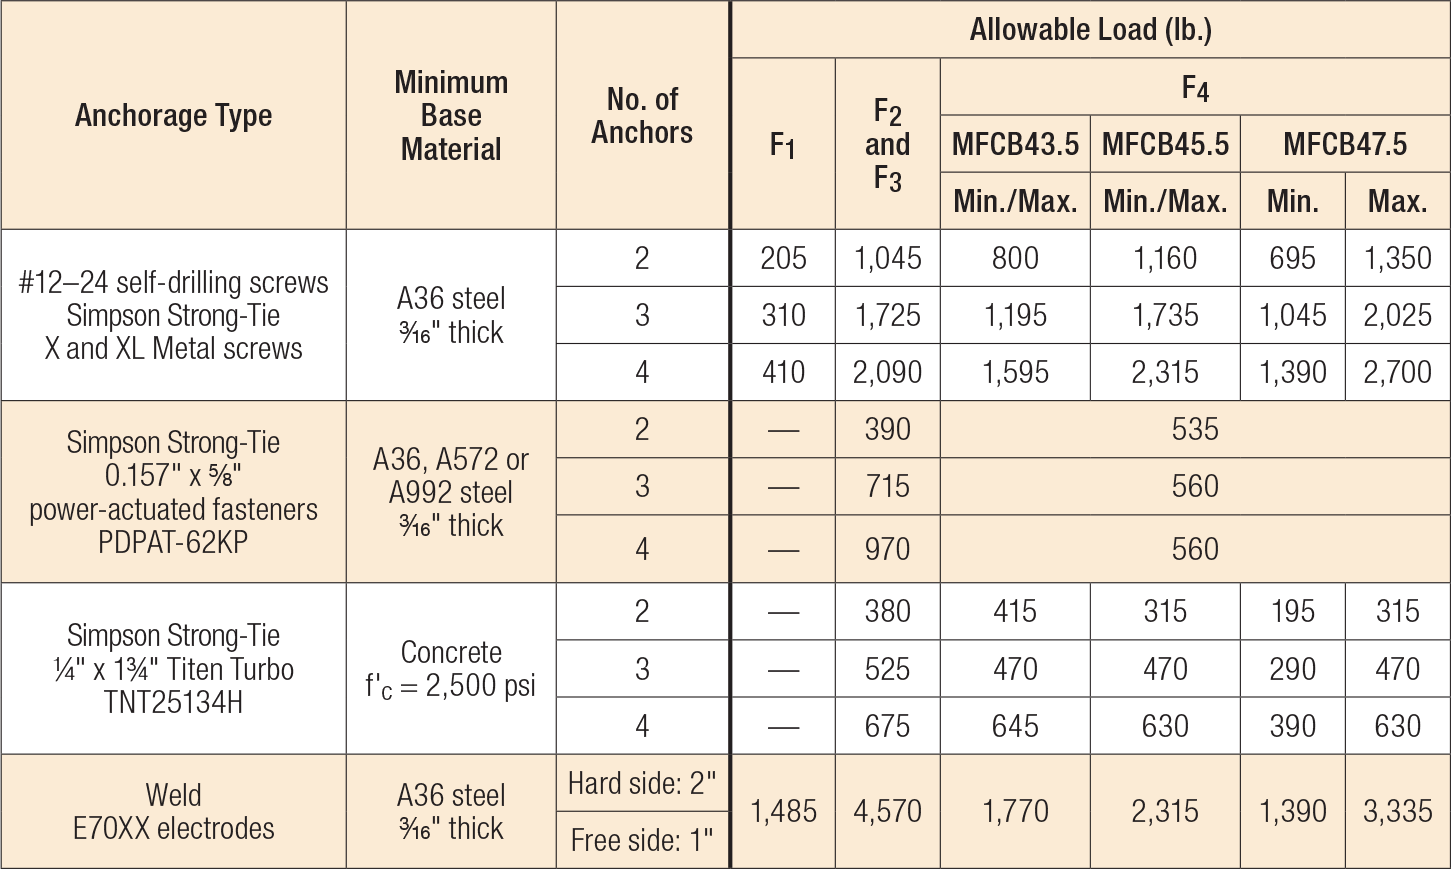 Table 2 — MFCB Allowable Anchorage Loads (lb.)